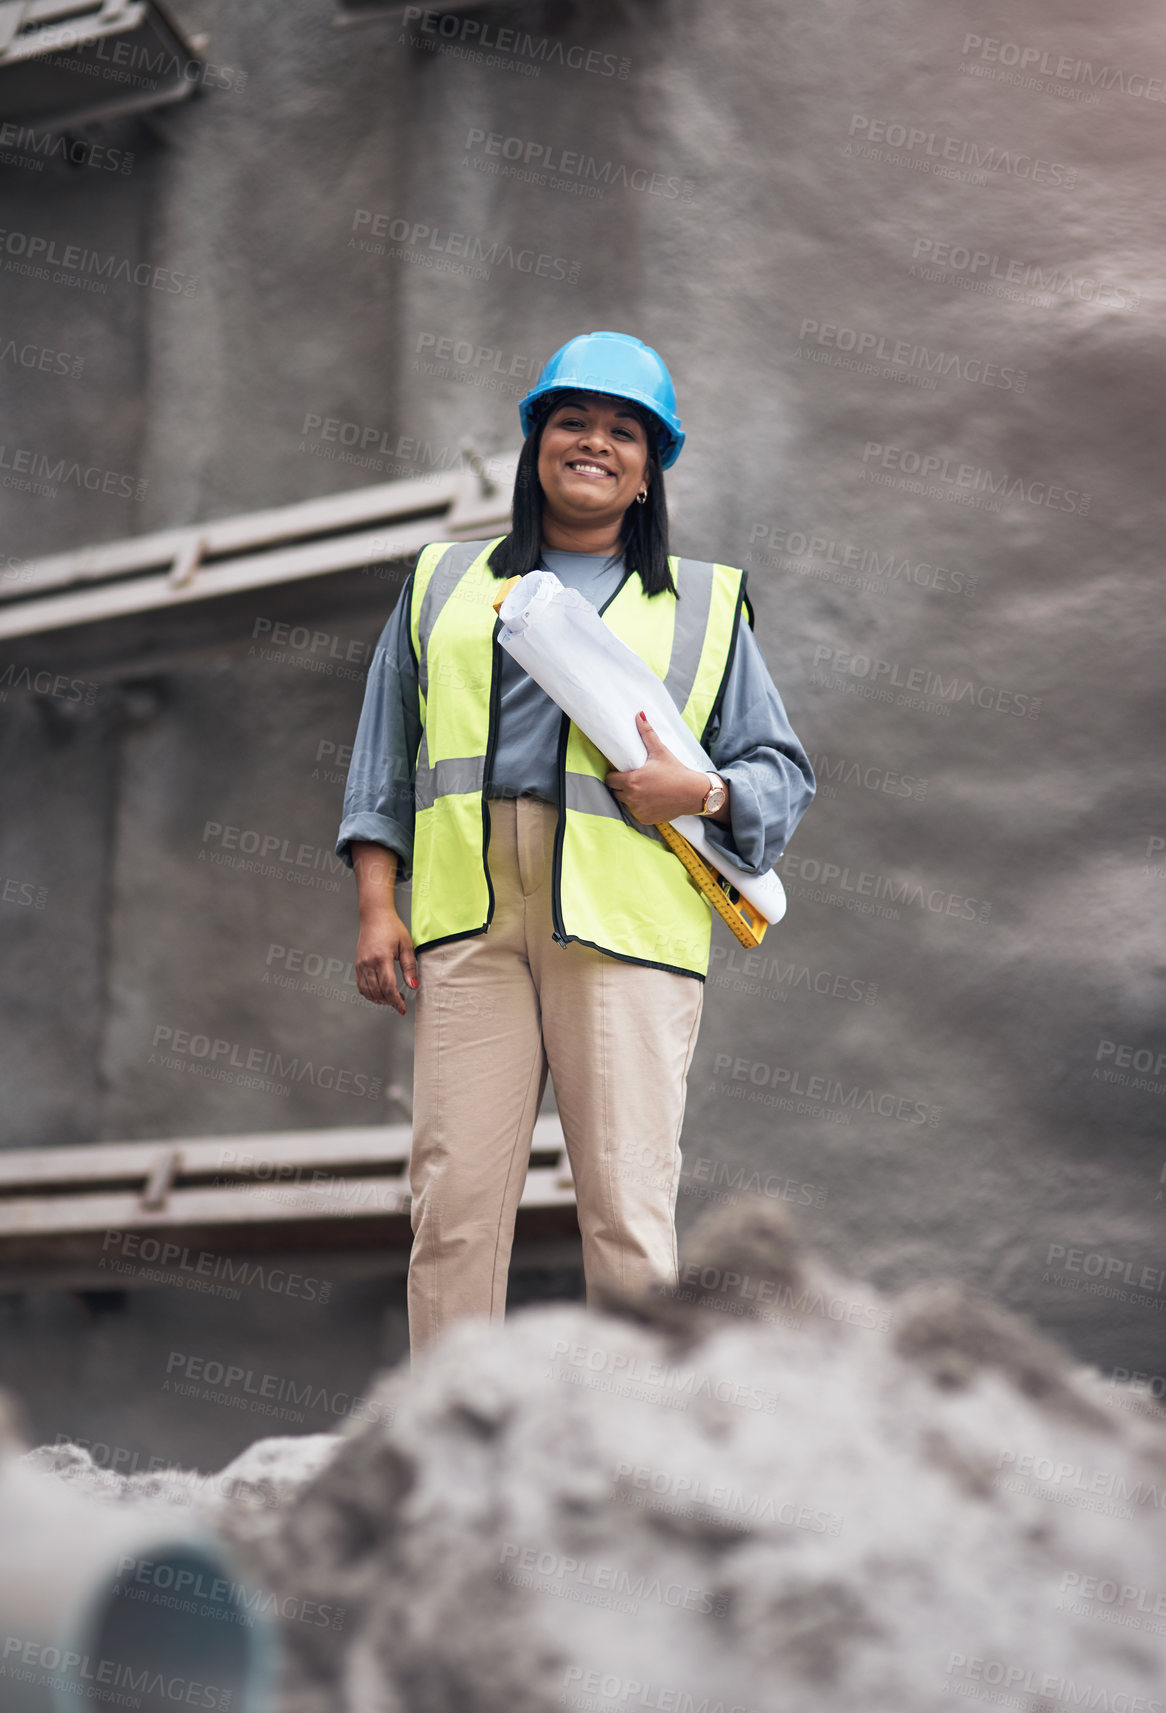 Buy stock photo Cropped portrait of an attractive young female construction worker working on site